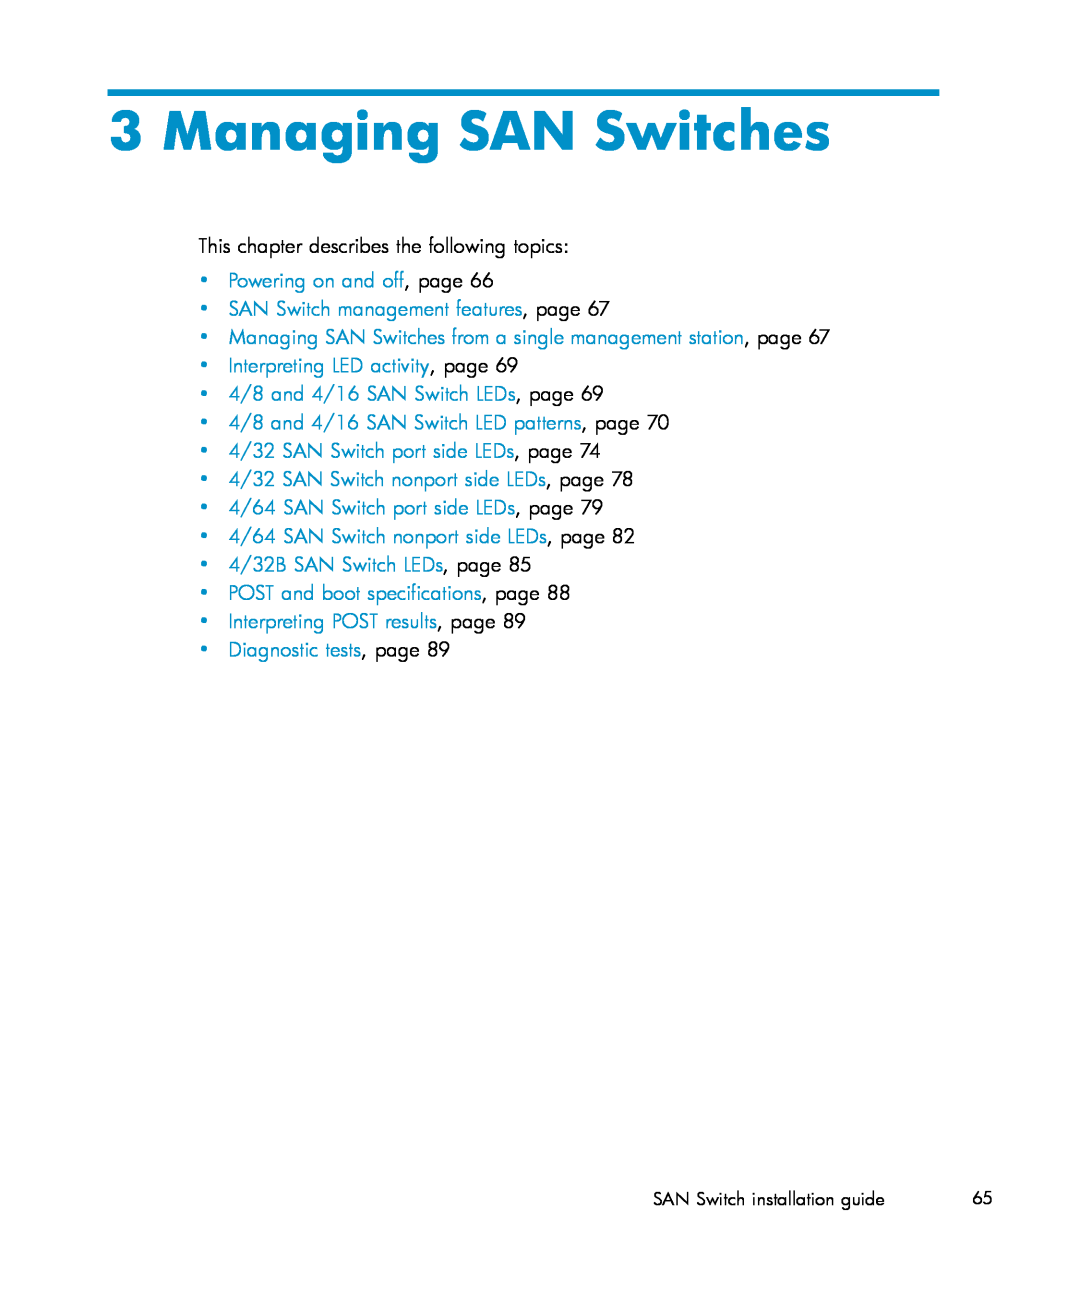 IBM AA-RWF3A-TE manual Managing SAN Switches, Powering on and off, page SAN Switch management features, page 